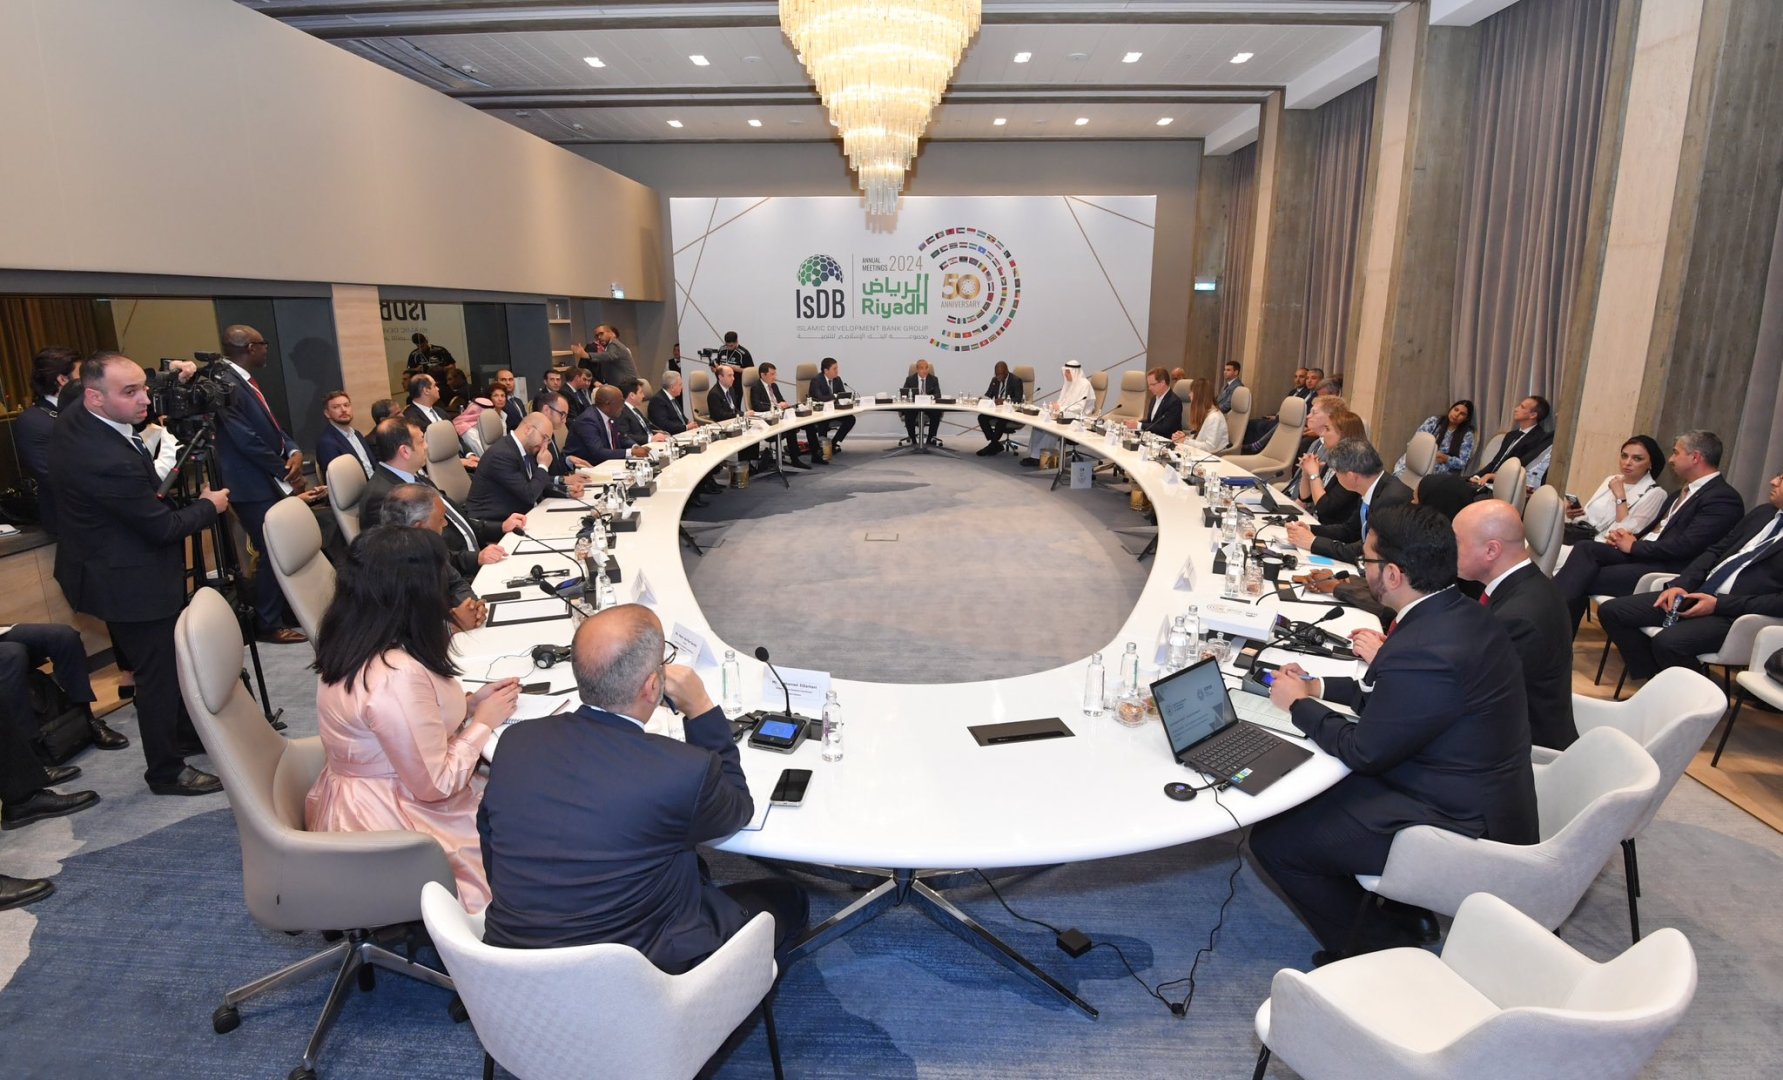 Azebaijani economy minister takes part in roundtable on COP29 as part of IDB annual meeting (PHOTO)